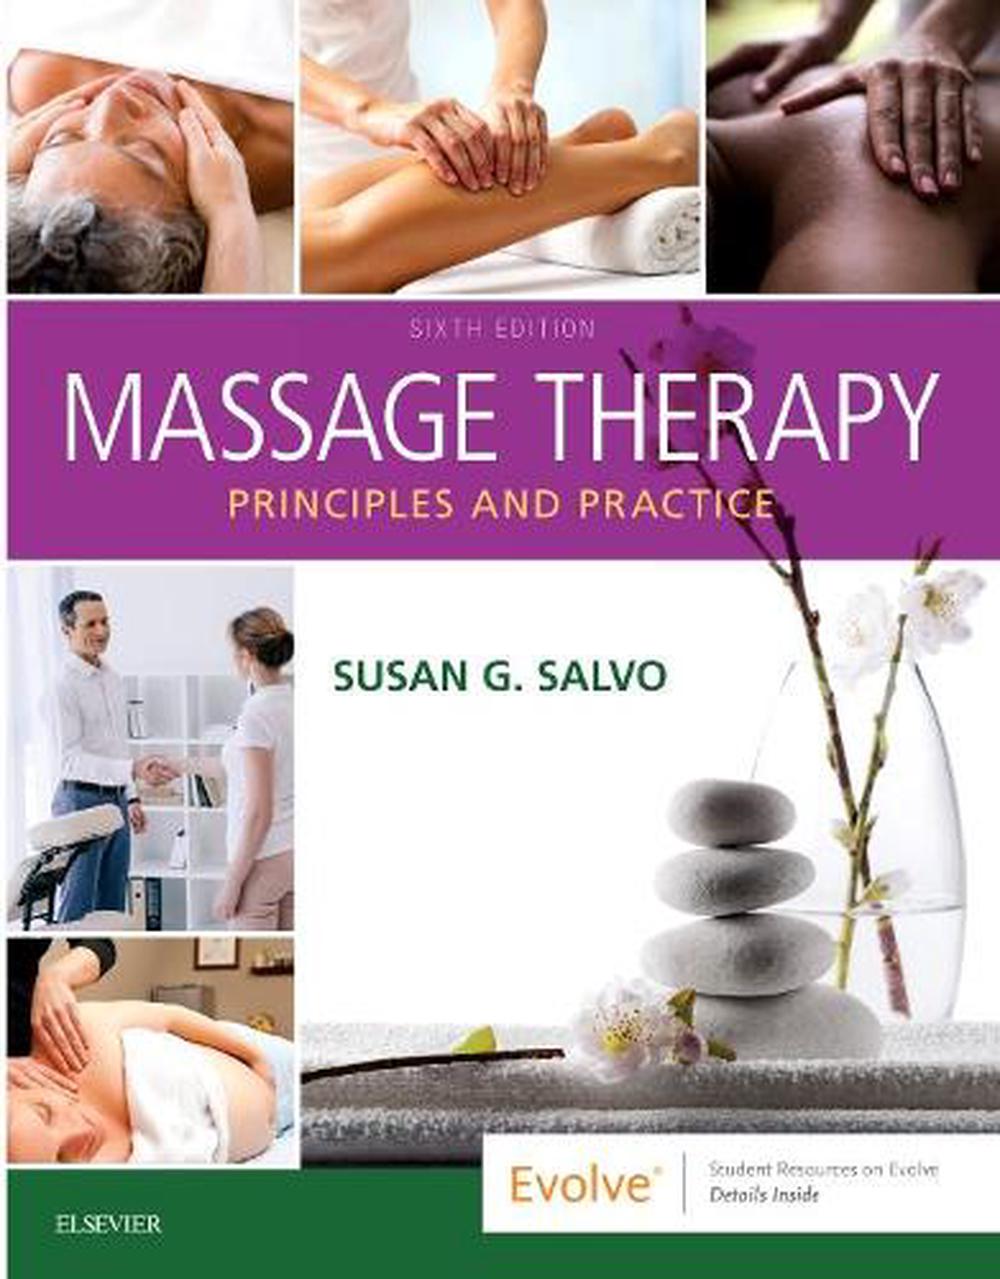 Massage Therapy Principles And Practice 6th Edition By Susan G Salvo